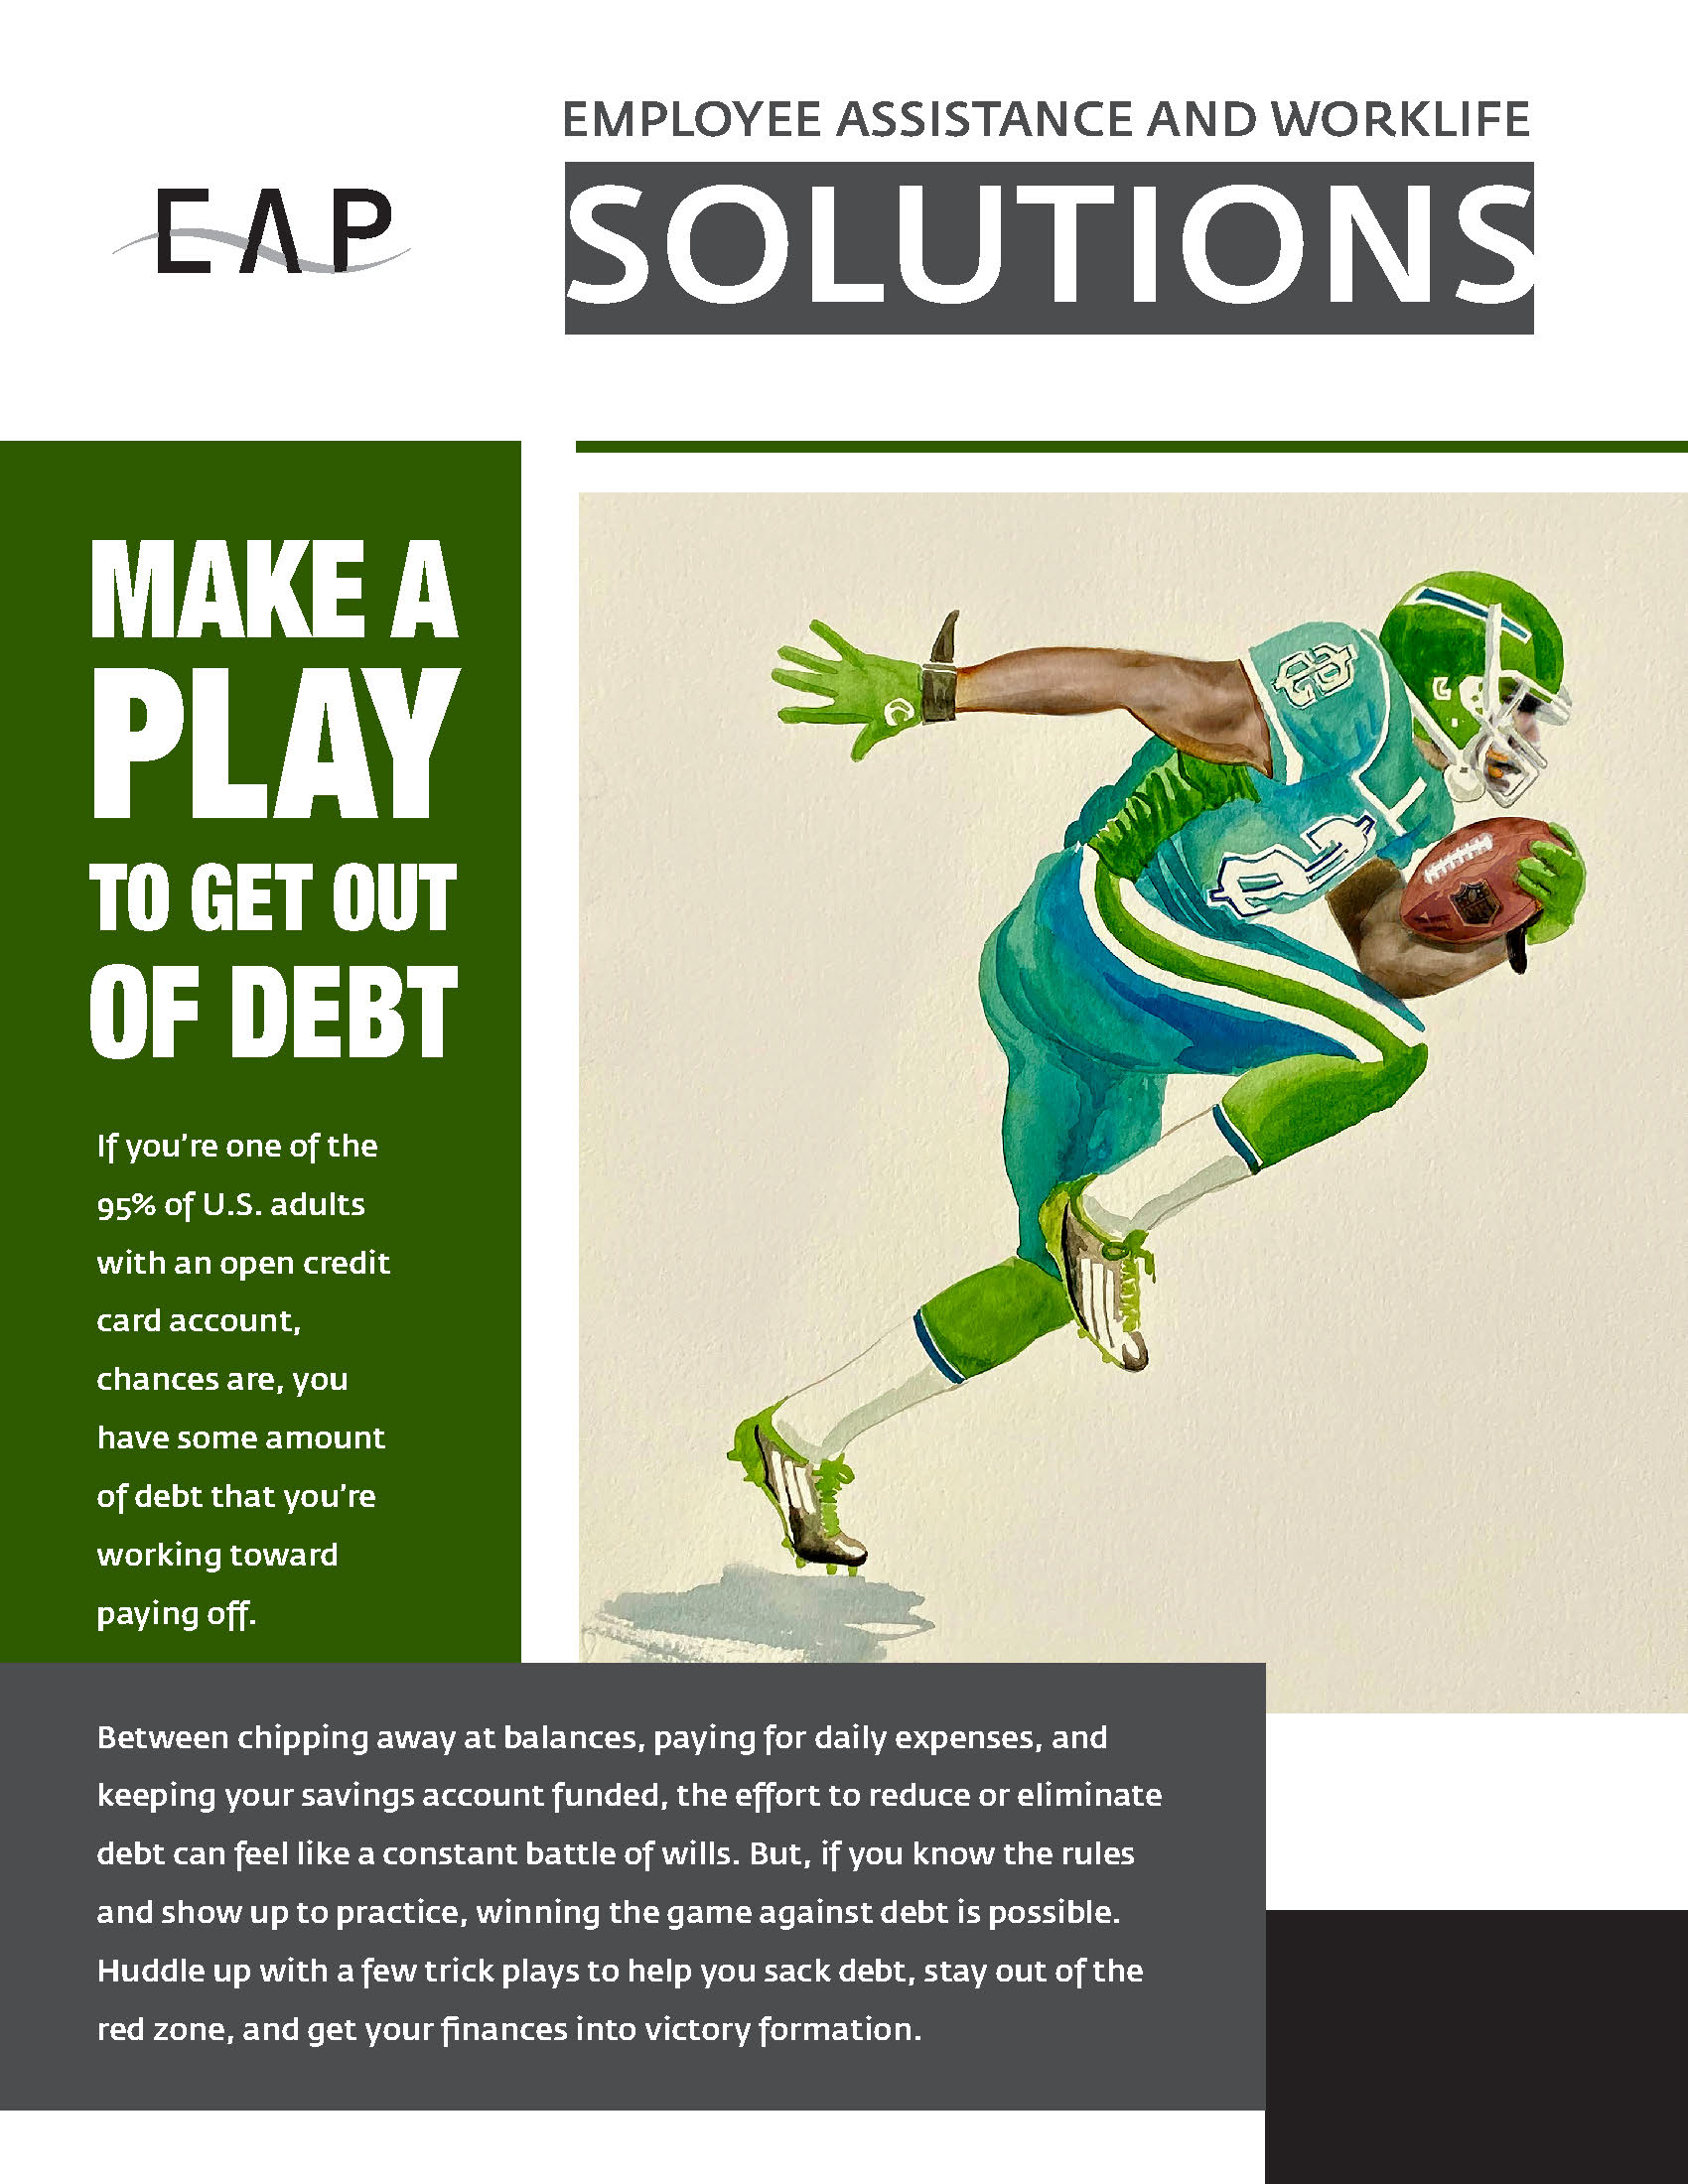 Make a Play to Get Out of Debt - Newsletter